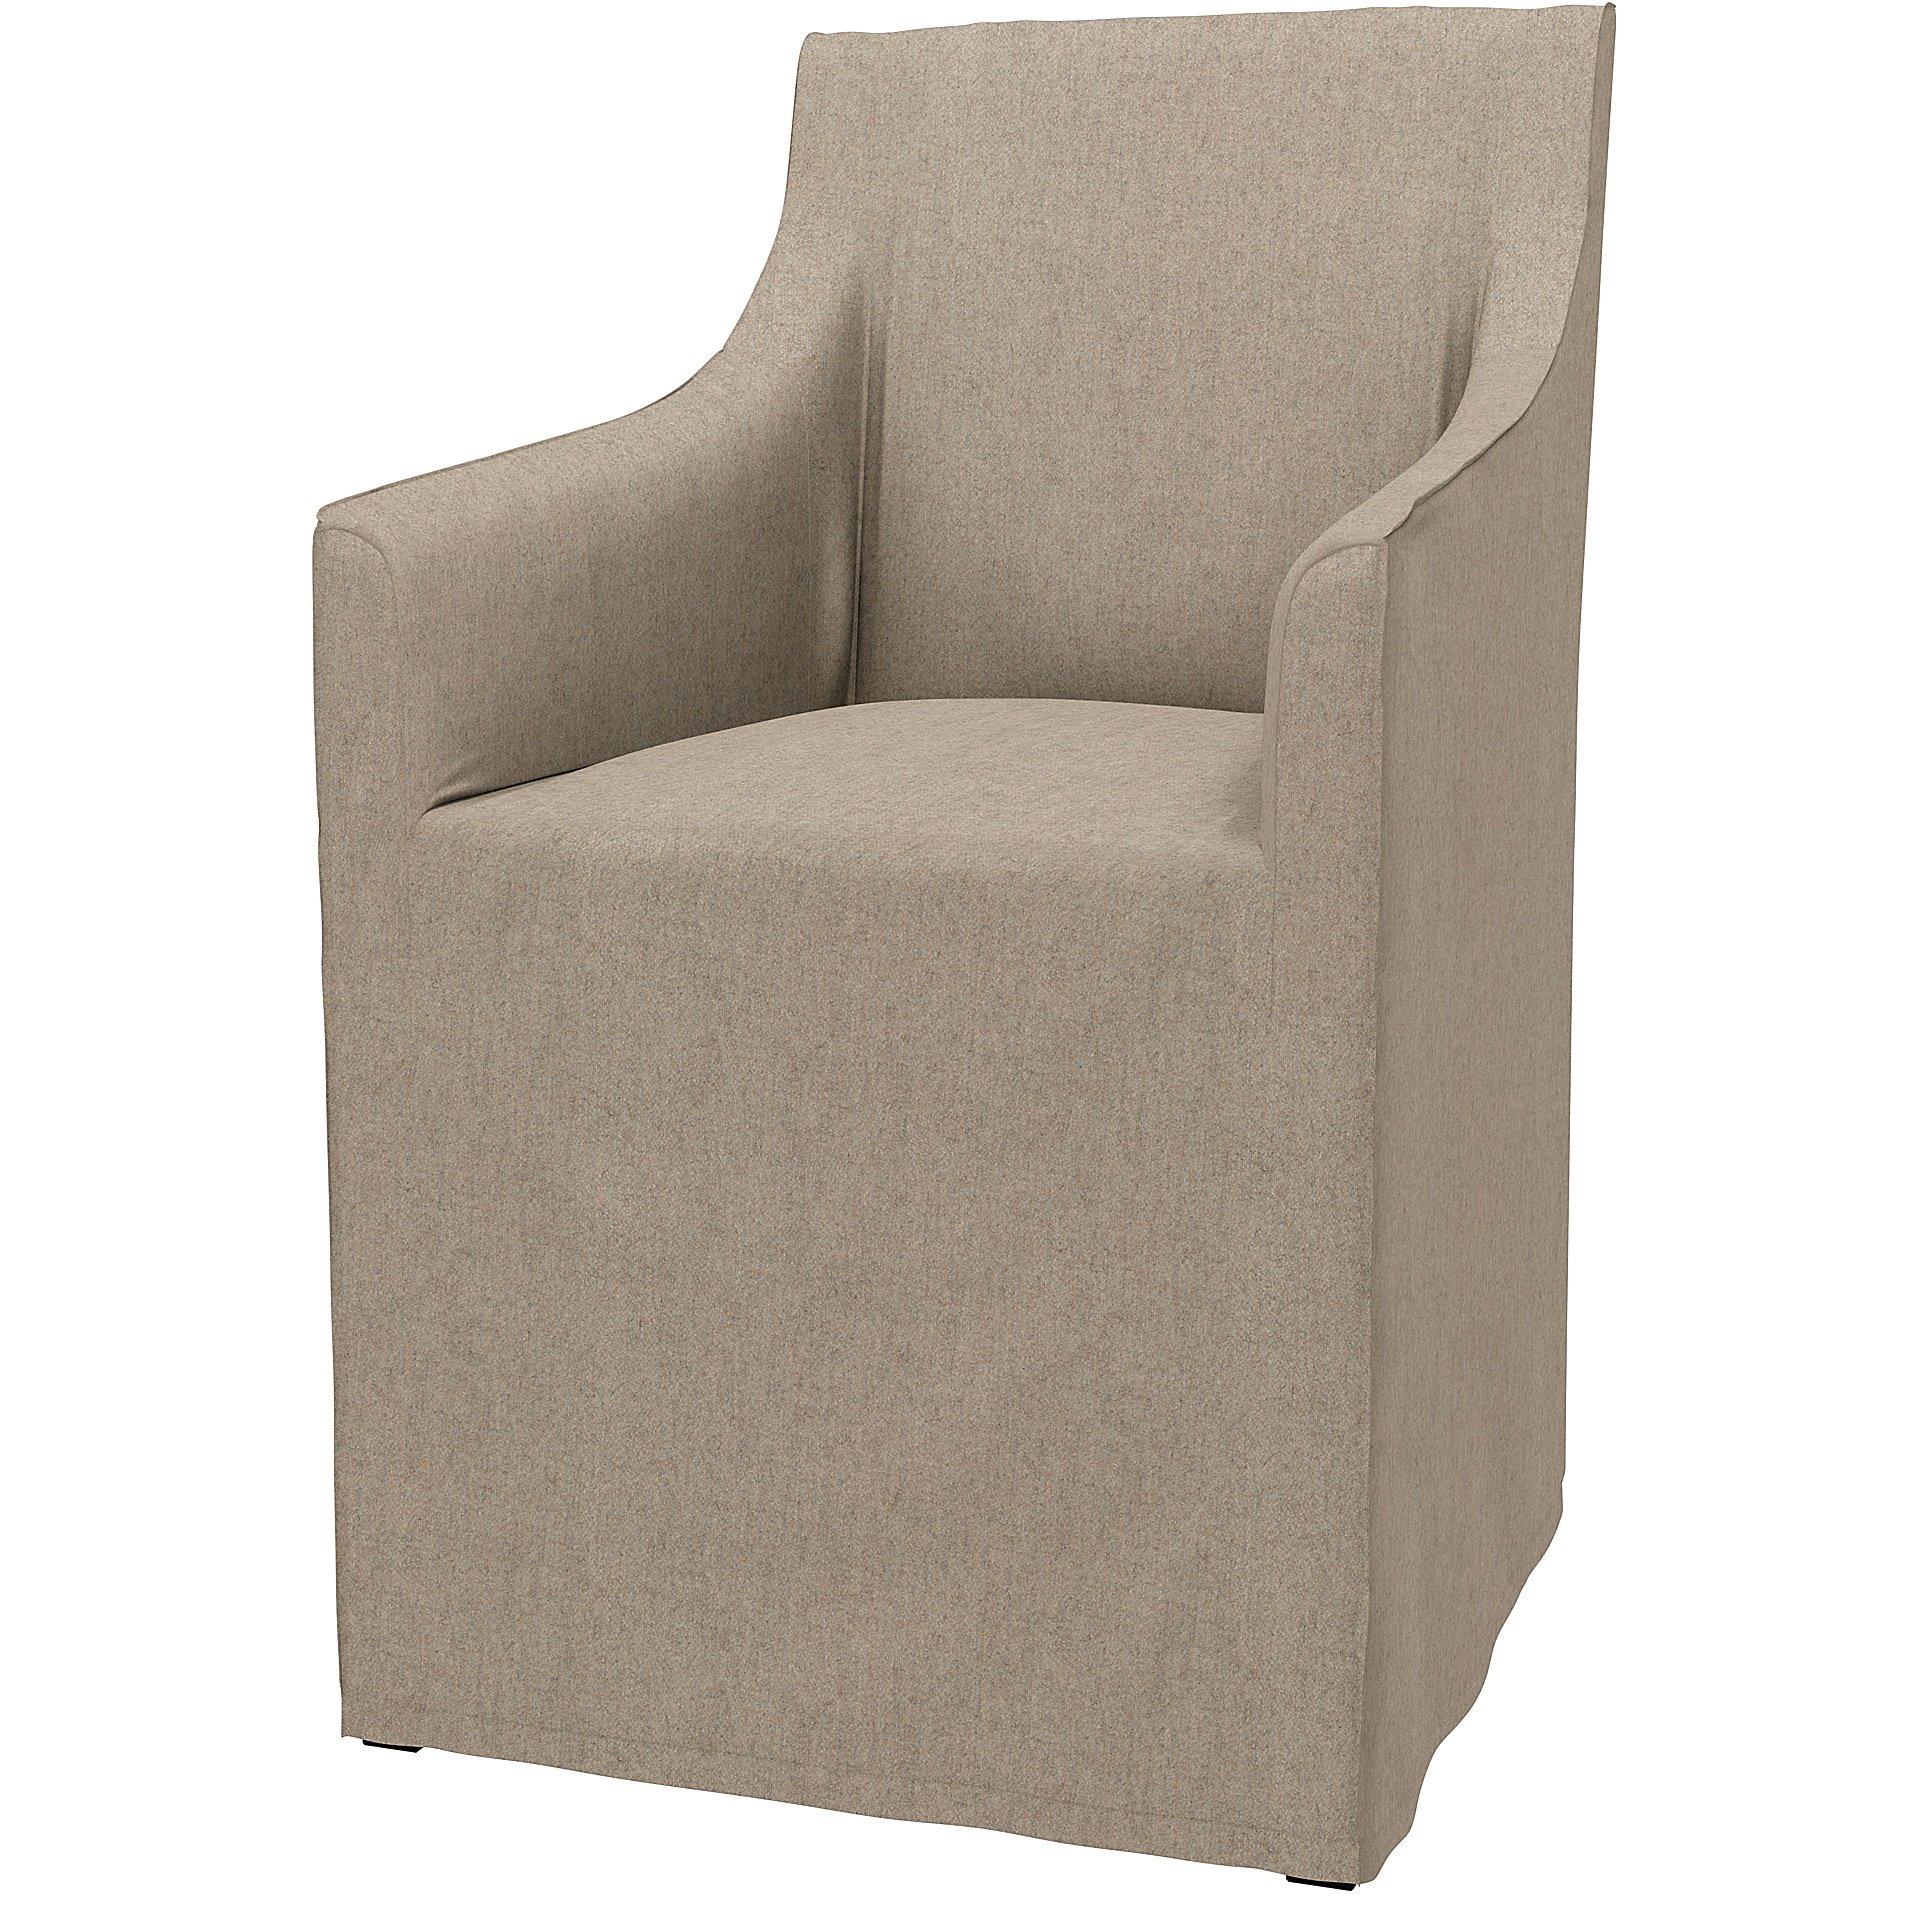 IKEA - Sakarias Chair with Armrests Cover, Birch, Wool - Bemz